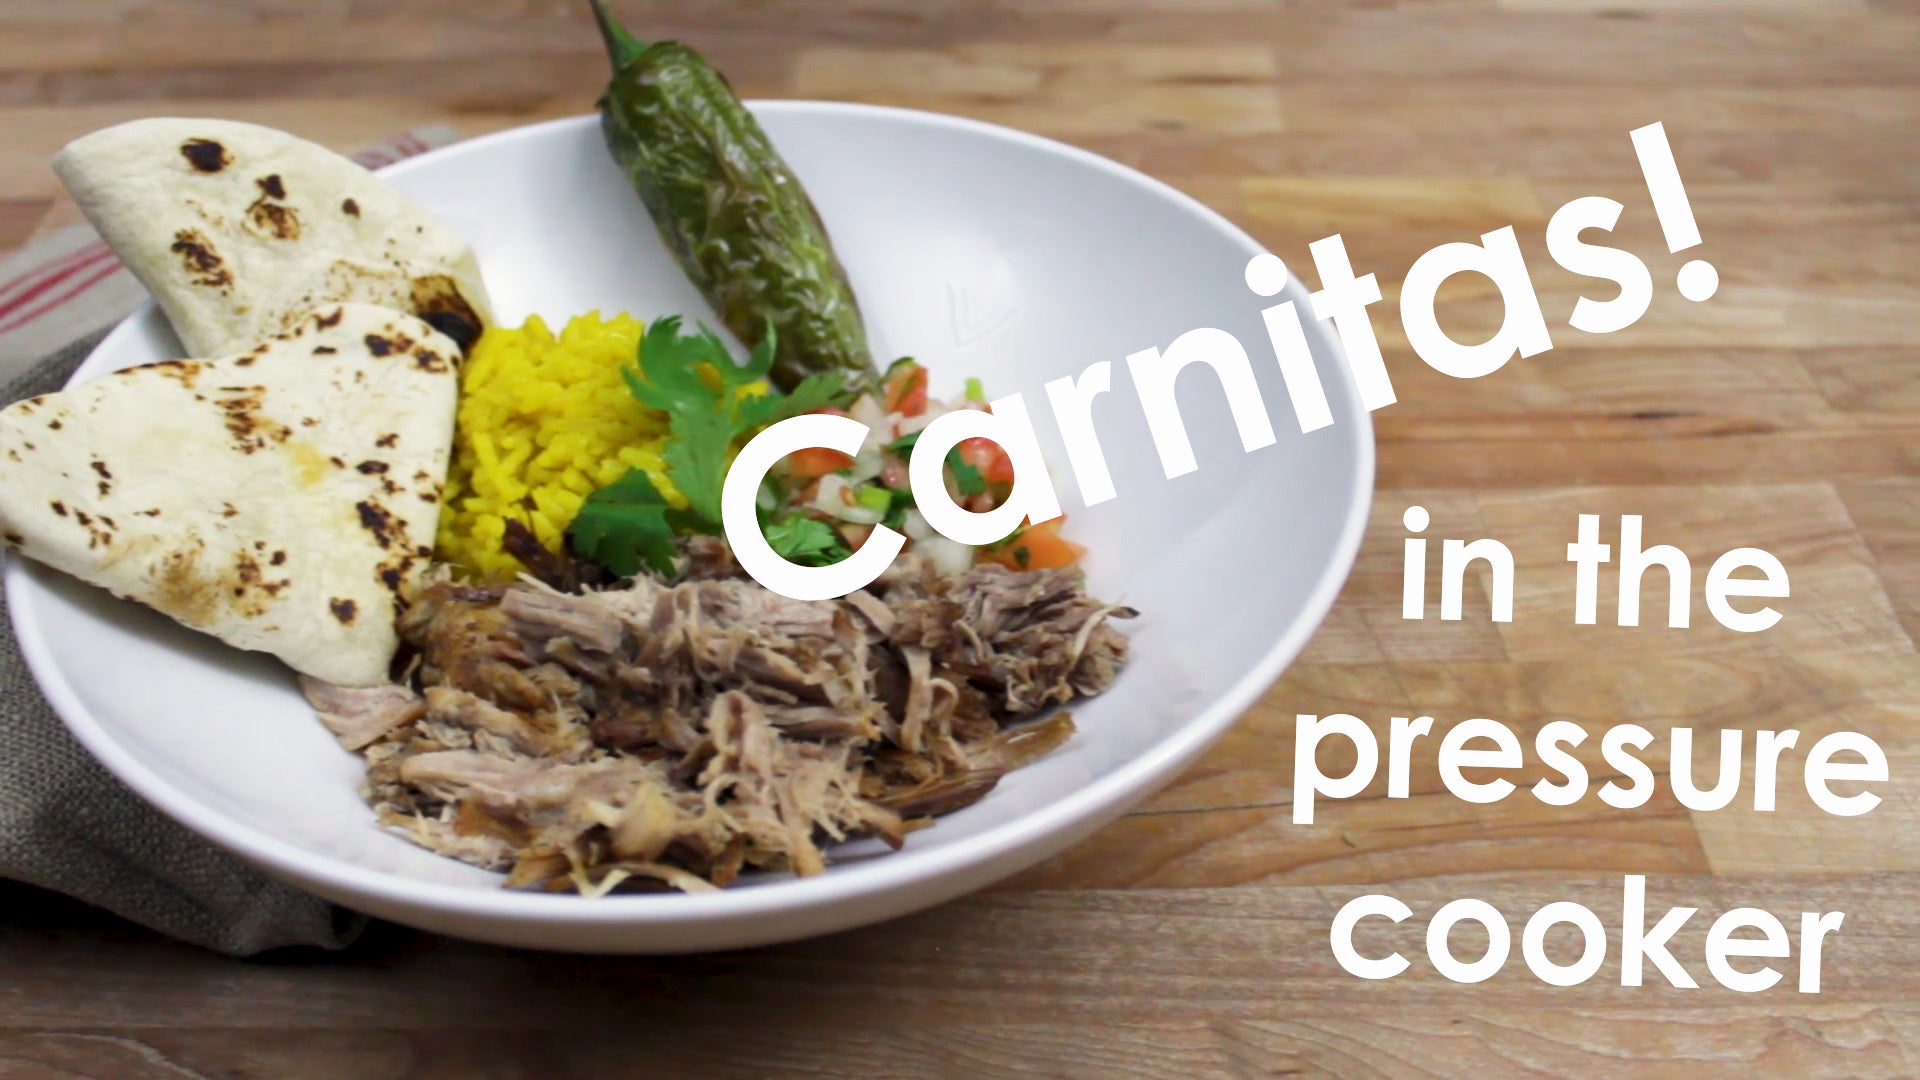 How to Make Carnitas in the Pressure Cooker